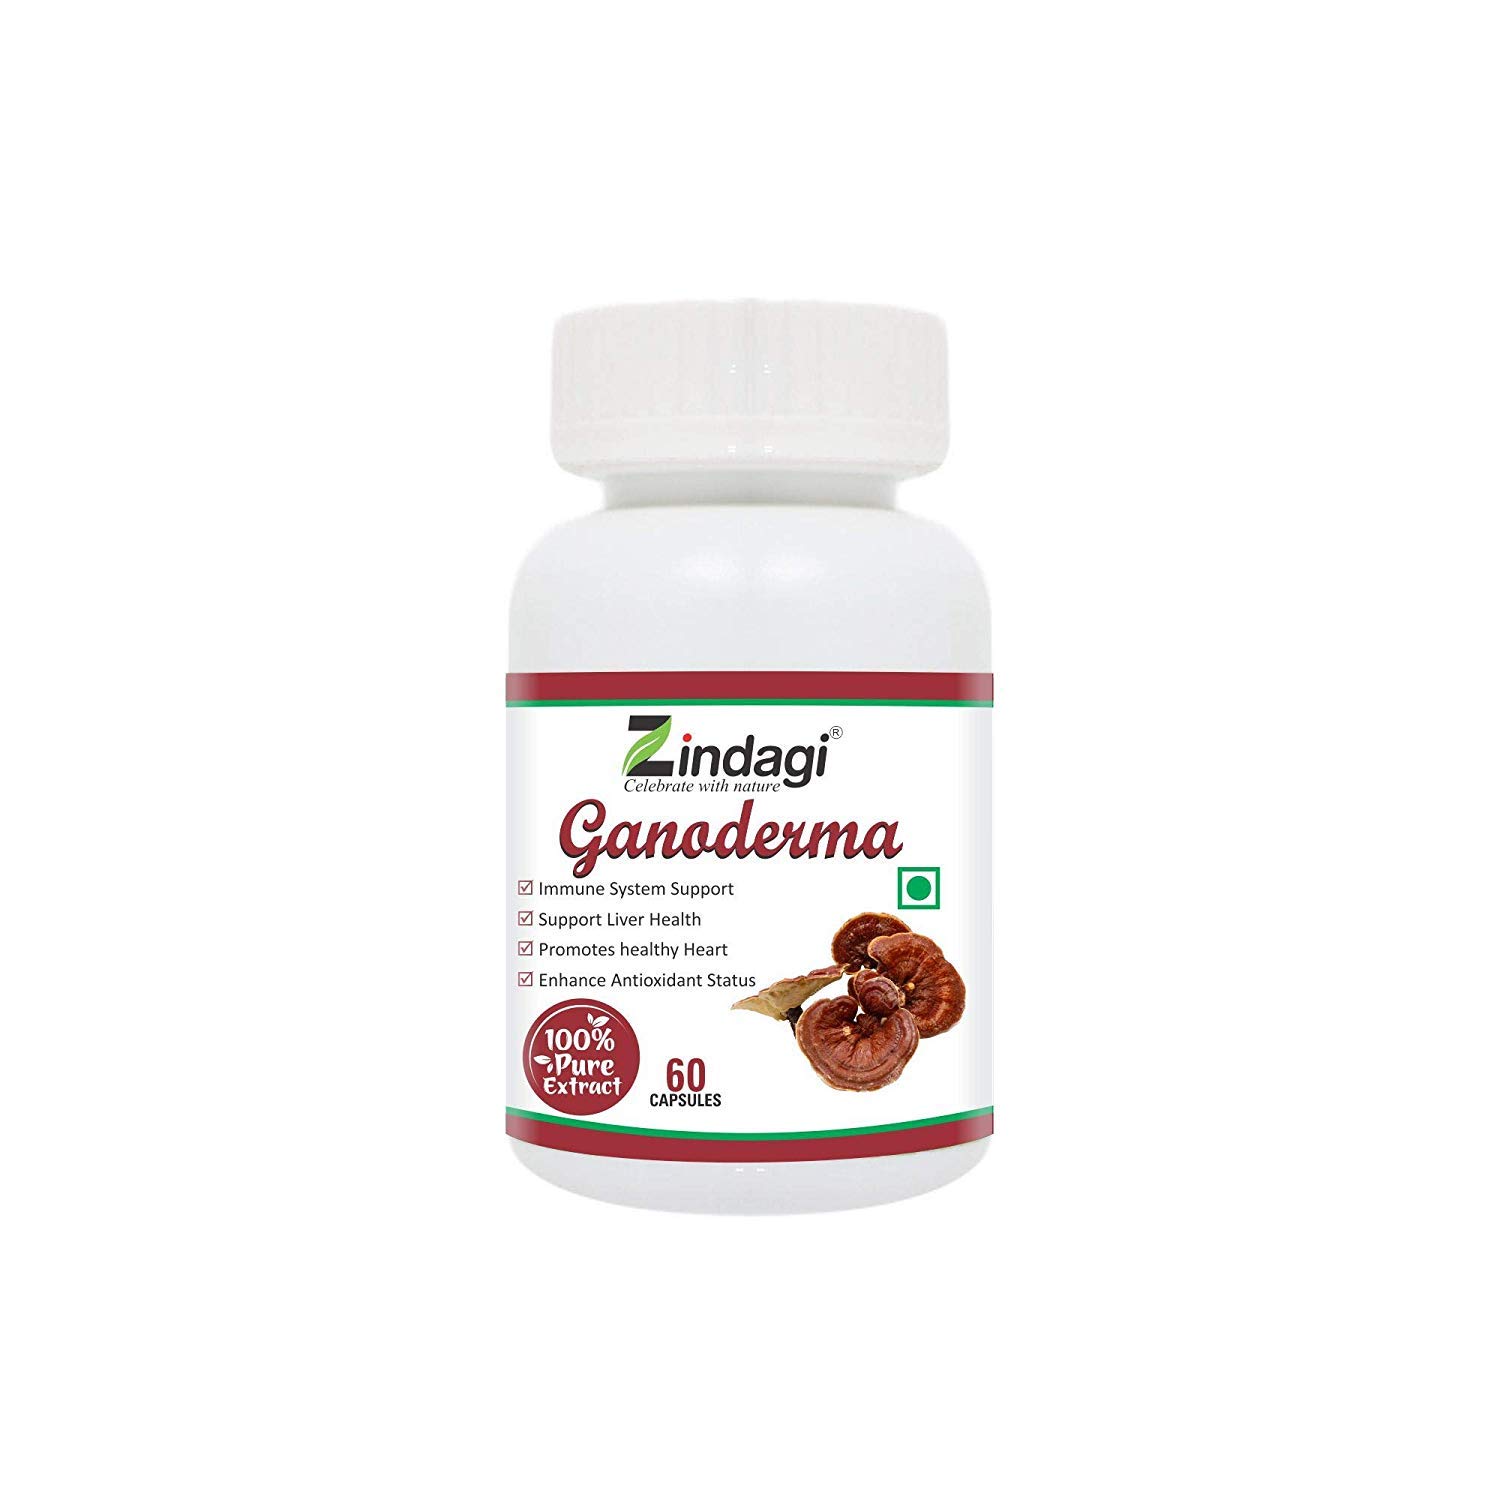 Buy Zindagi Ganoderma Pure Extract Capsules - Helpful In Weight Management - Antioxidants For Healthy Body (60 Capsules) at Best Price Online